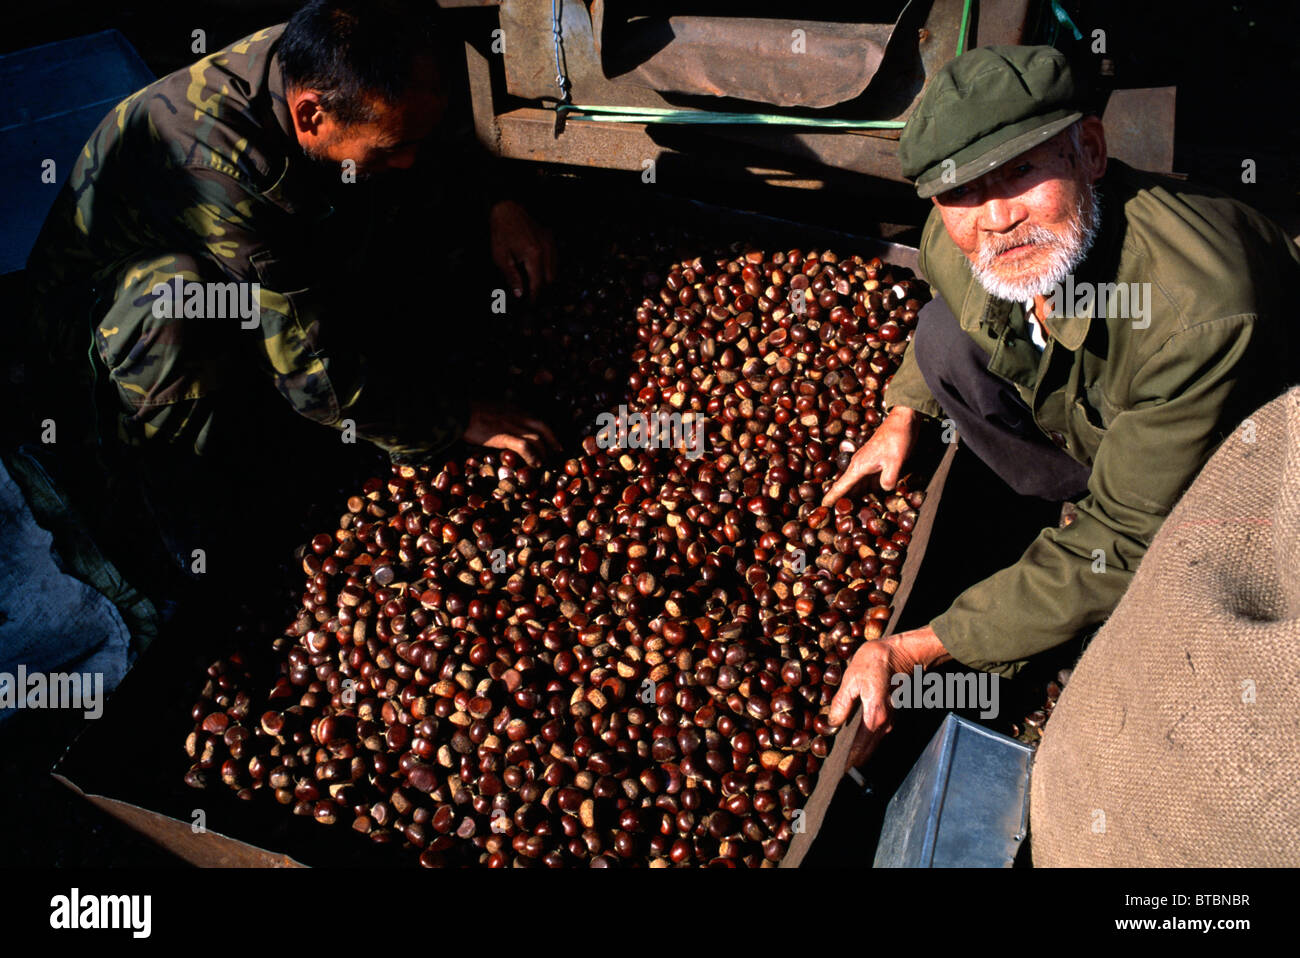 Chinese farmers pick chestnuts before selling to merchant in Huairou, Beijing, China. 2010 Stock Photo